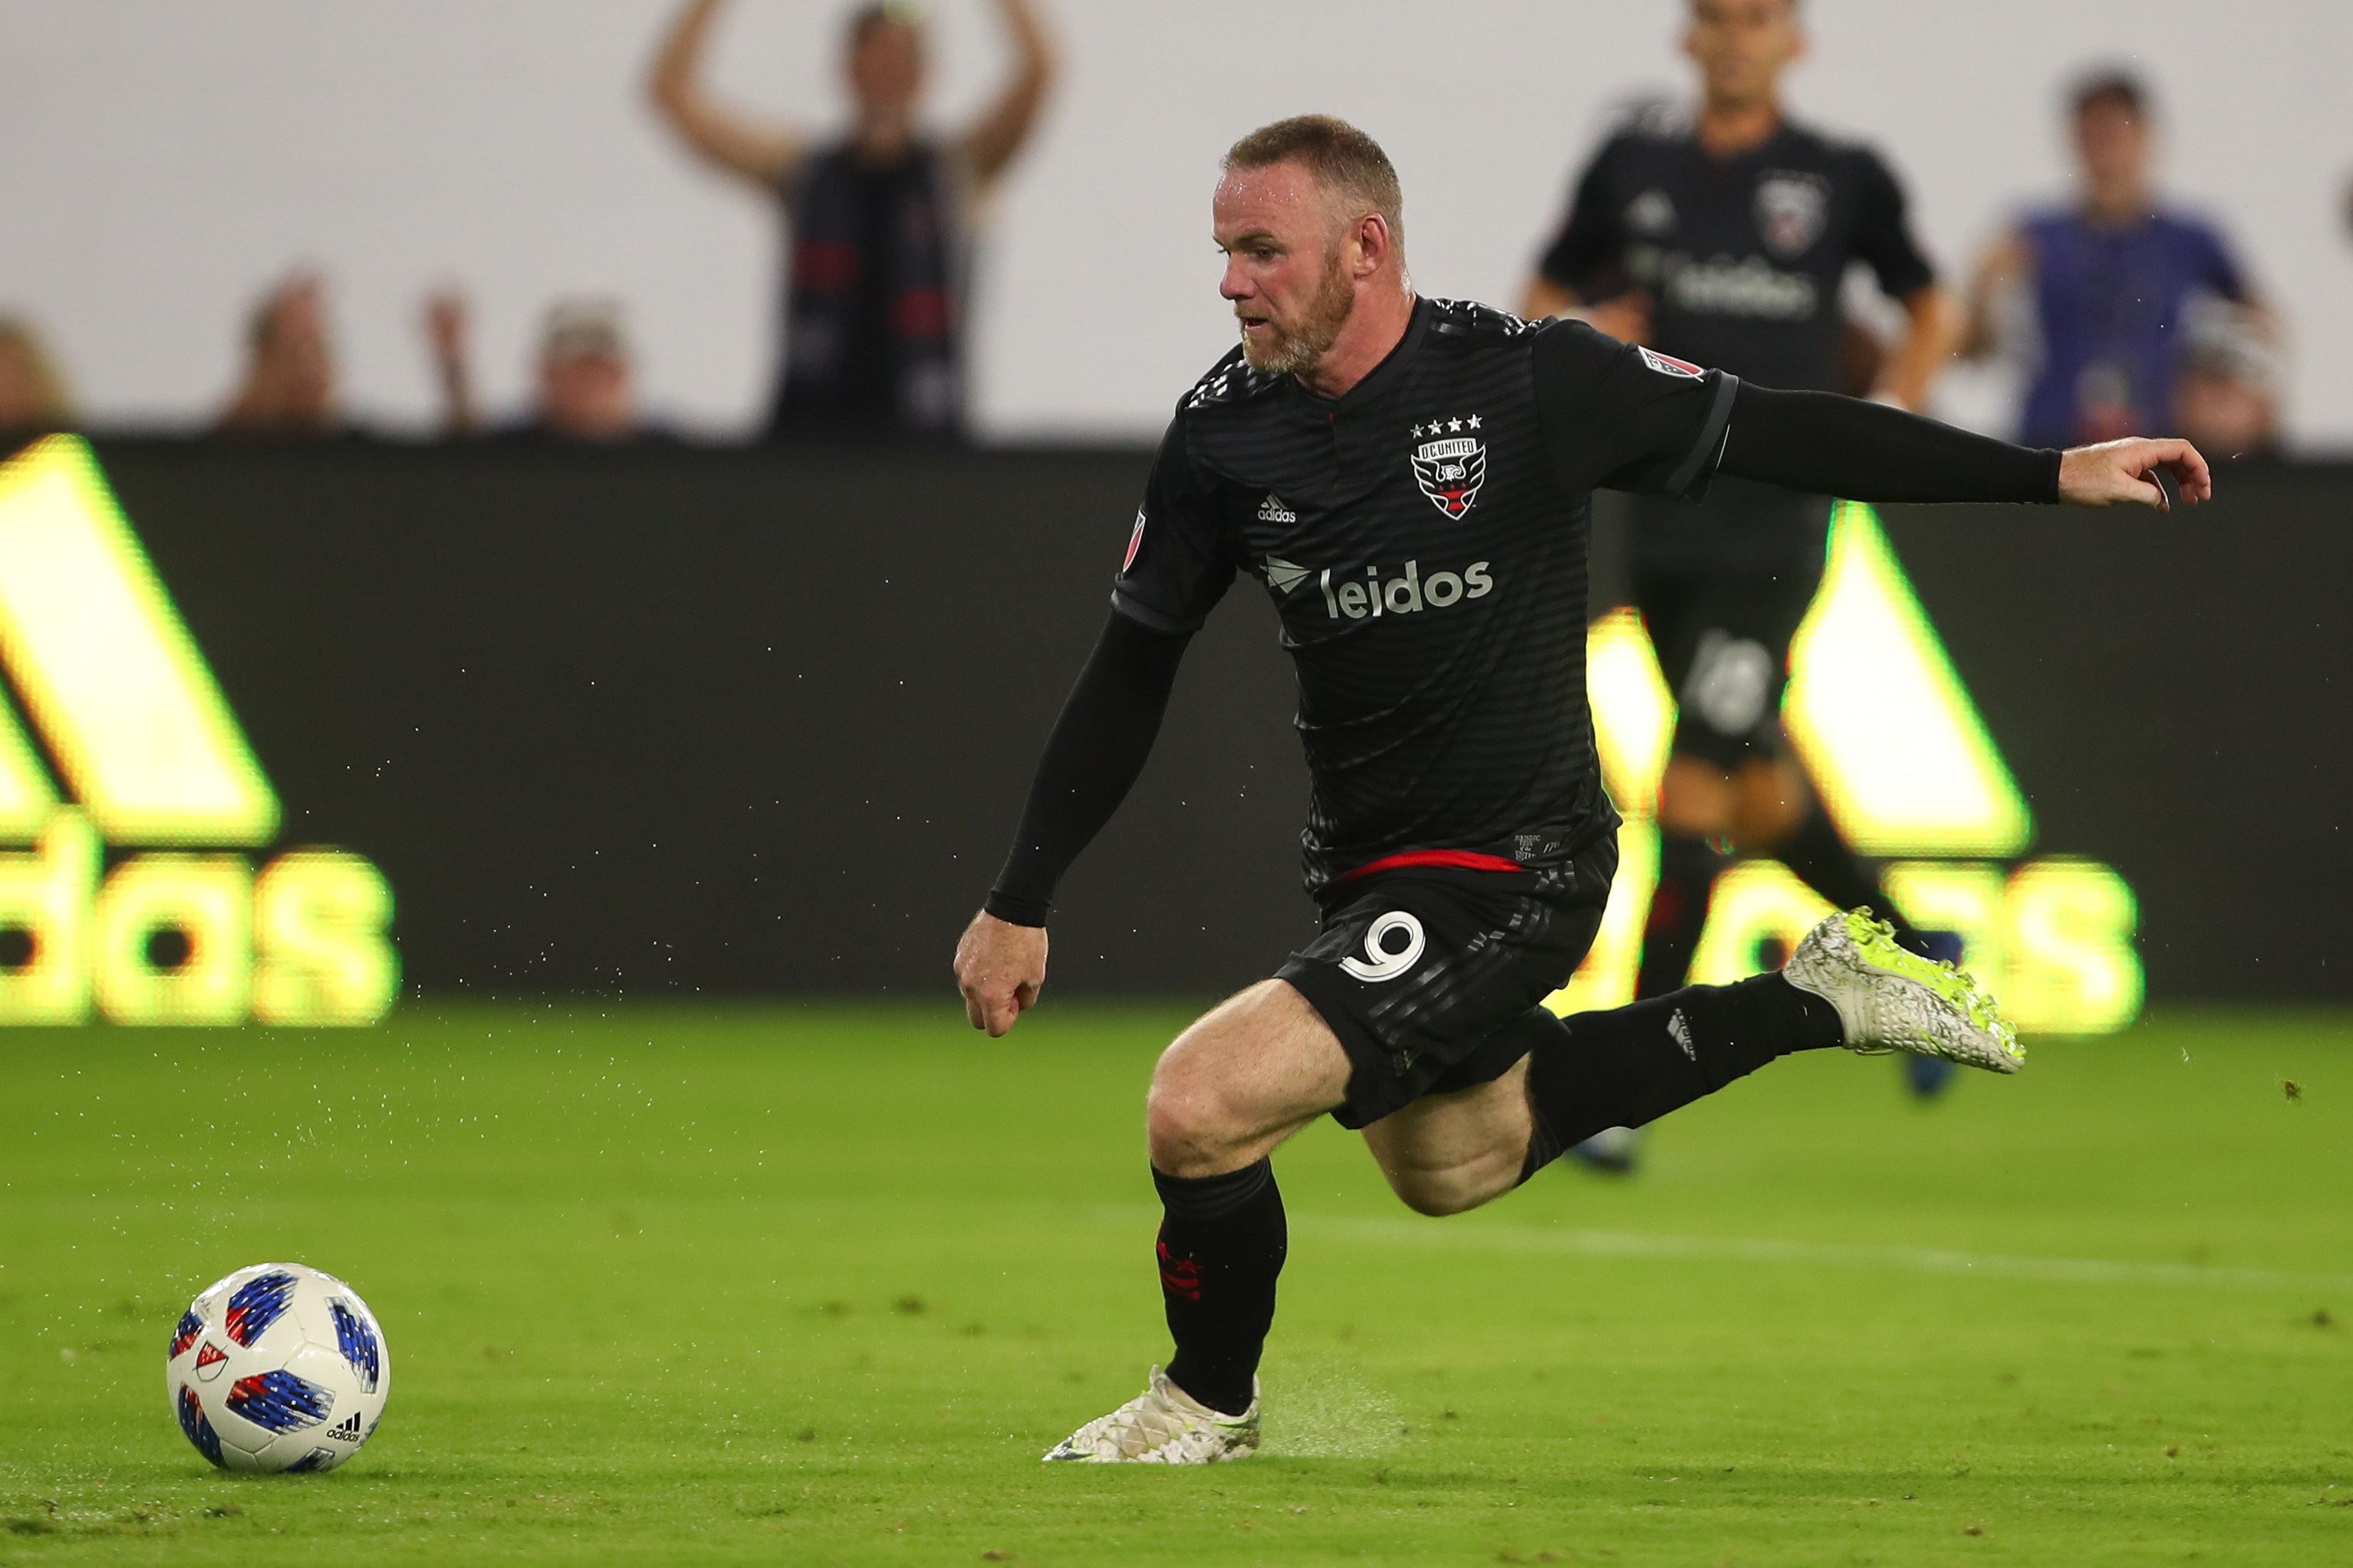 Wayne Rooney Saves DC United from Open-Net Goal Then Assists Game-Winner | Bleacher Report | Latest News, Videos and Highlights